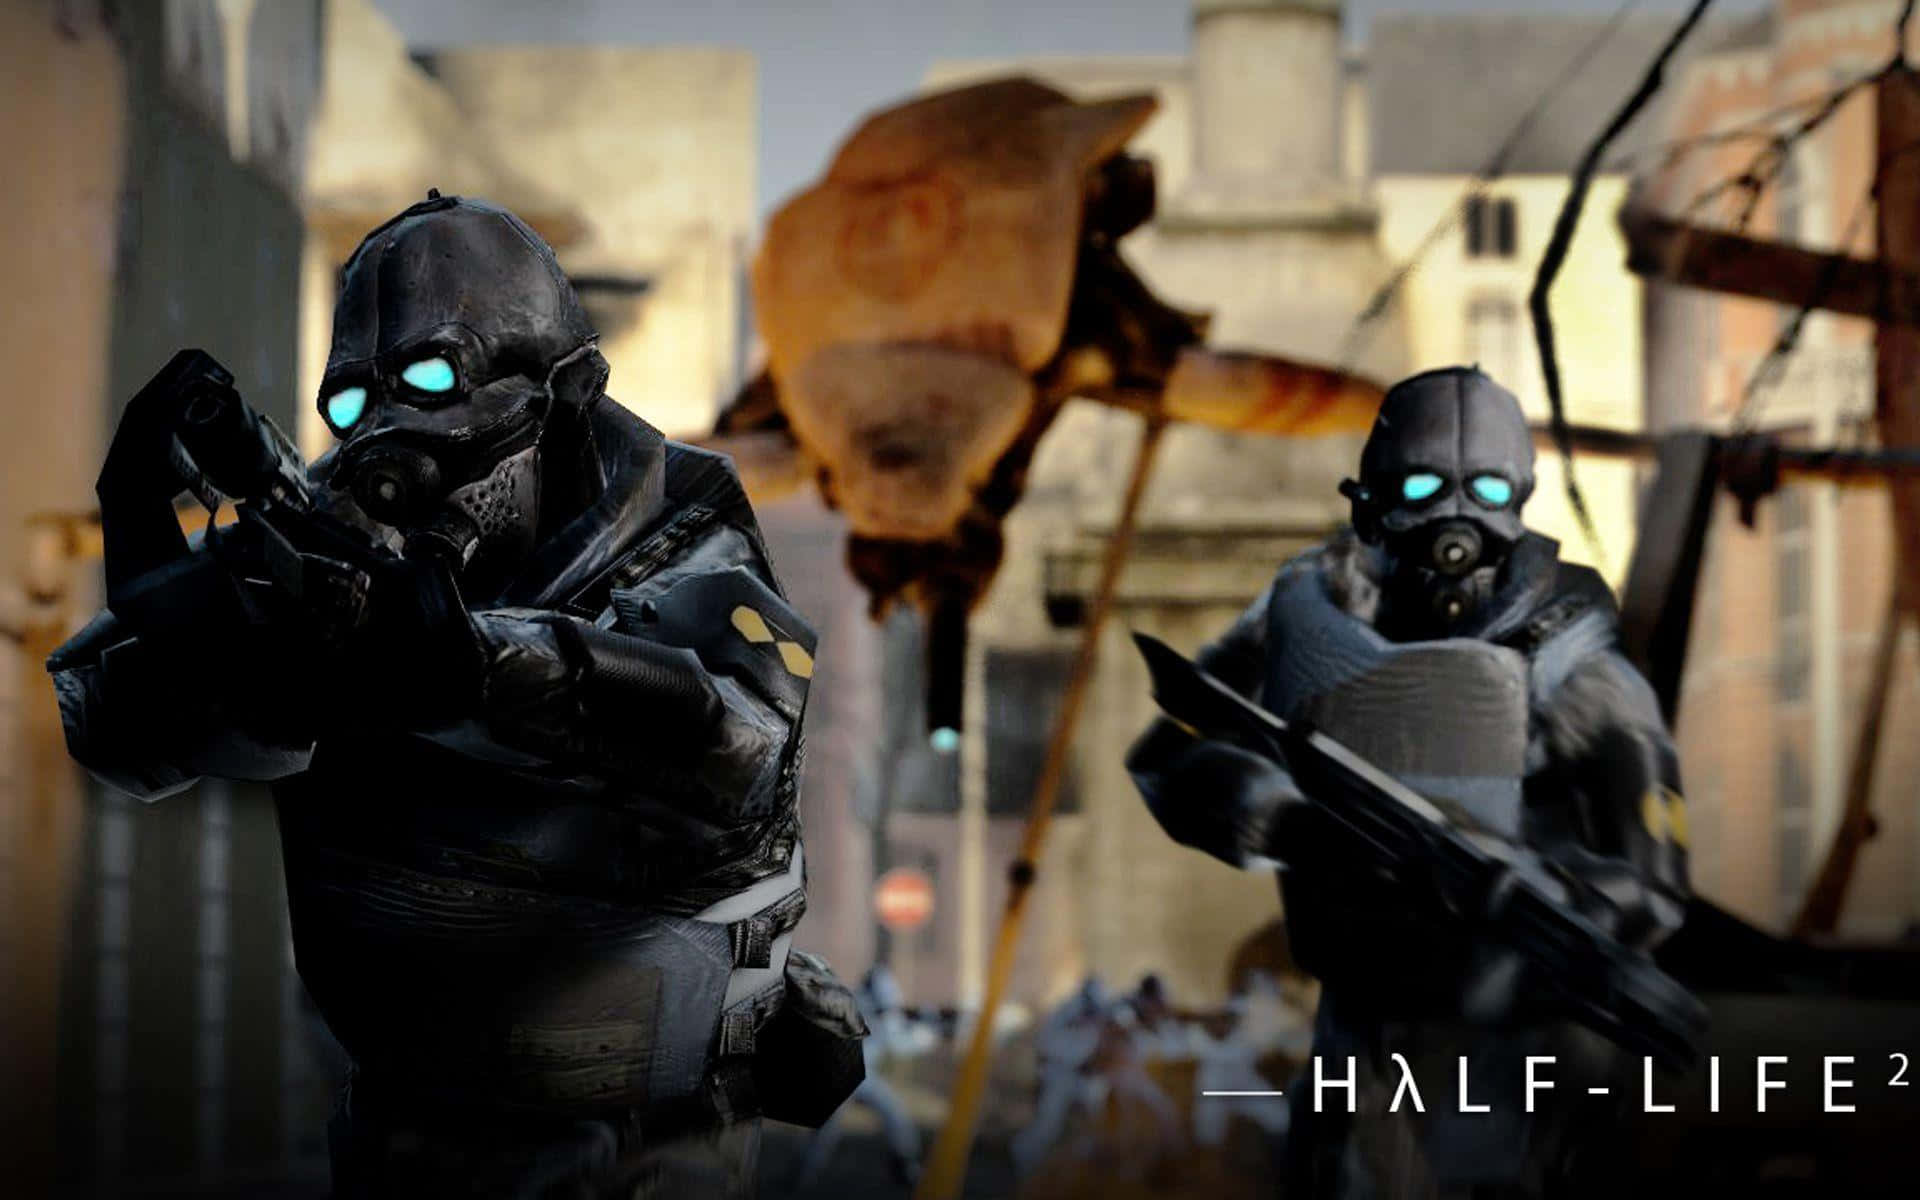 Half-Life 2 - Combining Action, Adventure and Sci-Fi Into an Epic Game Wallpaper